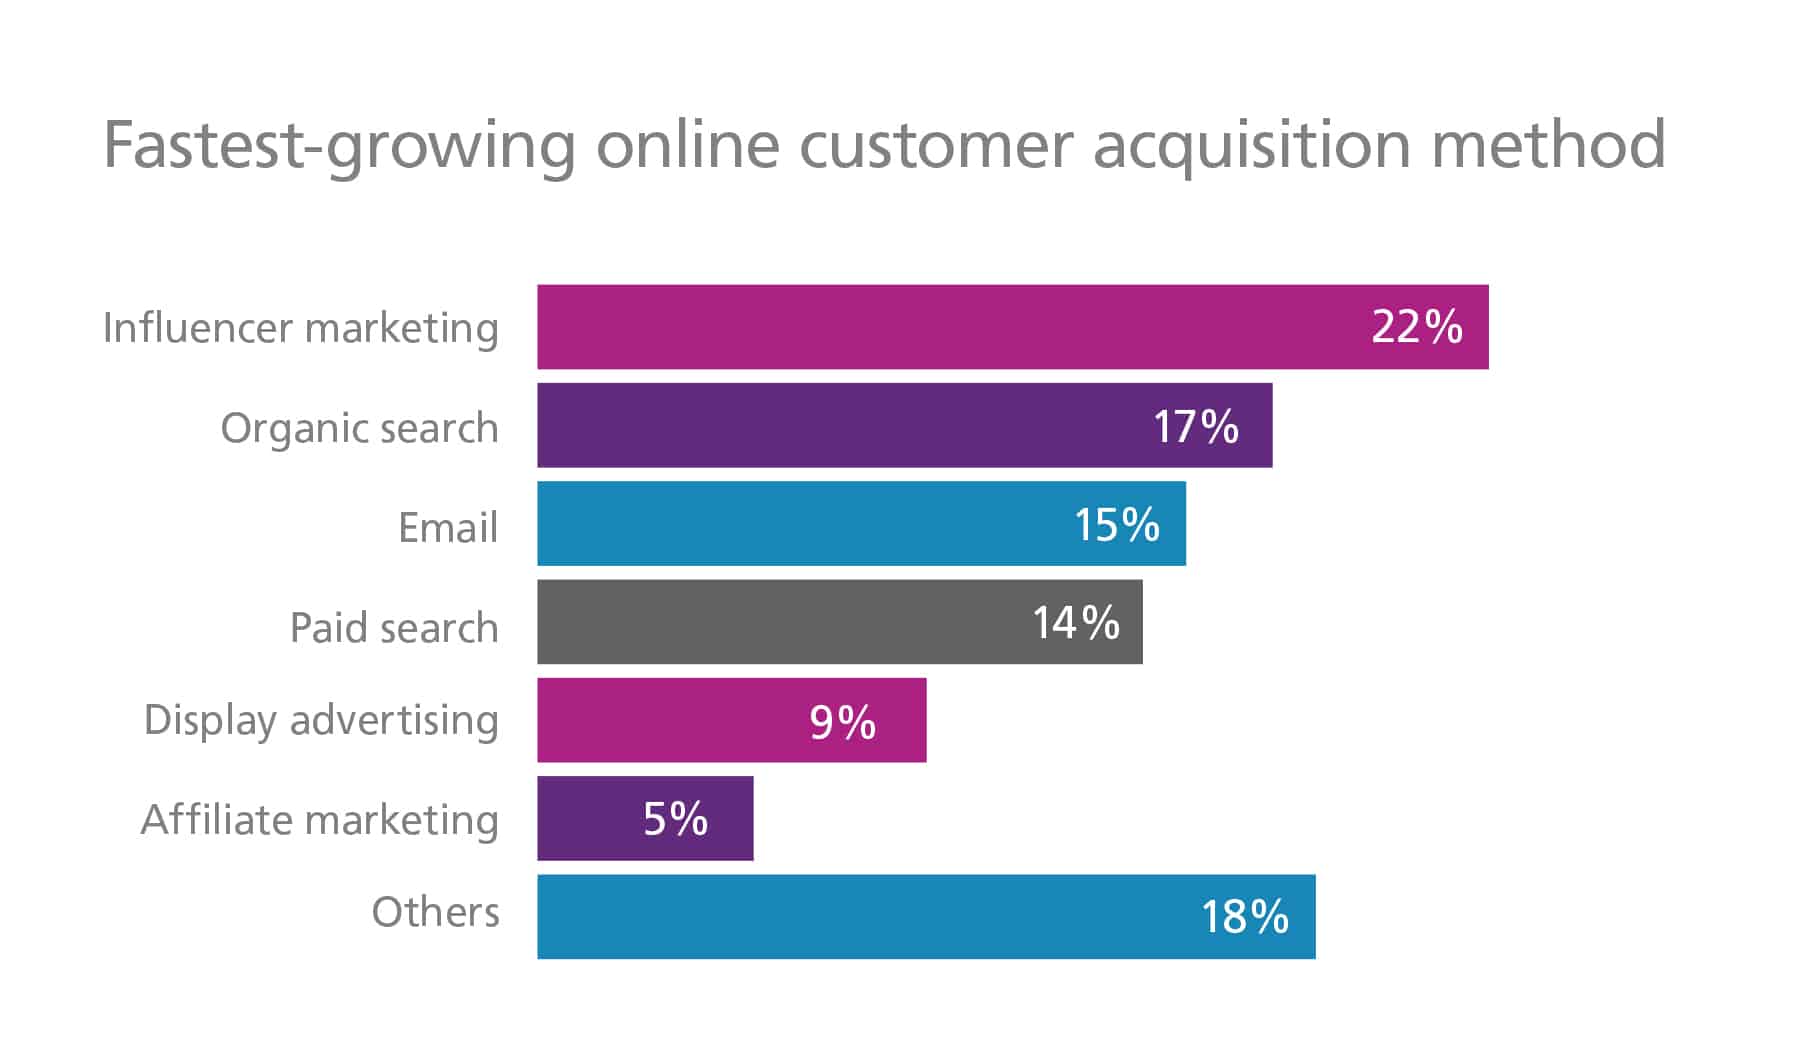 Bar graph of fastest-growing online customer acquisition methods